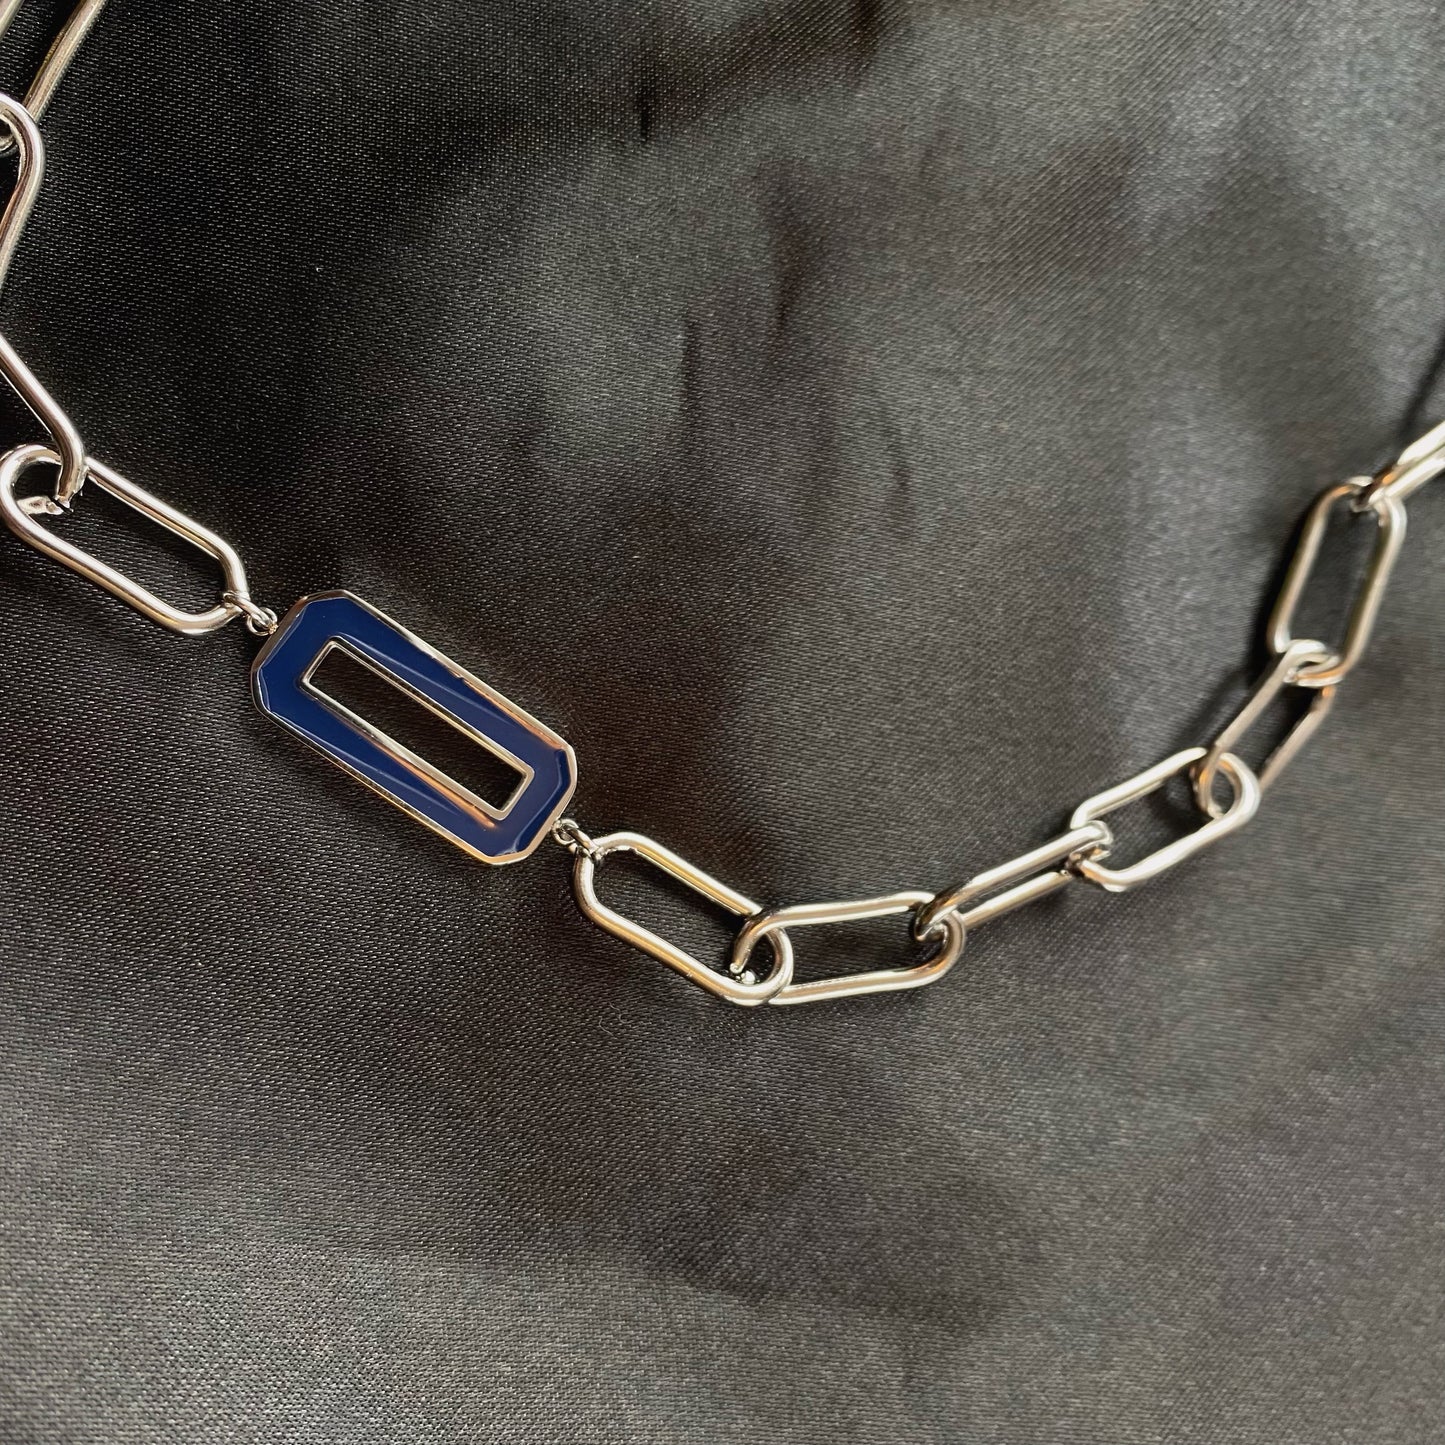 "Chunky Chain" Necklace